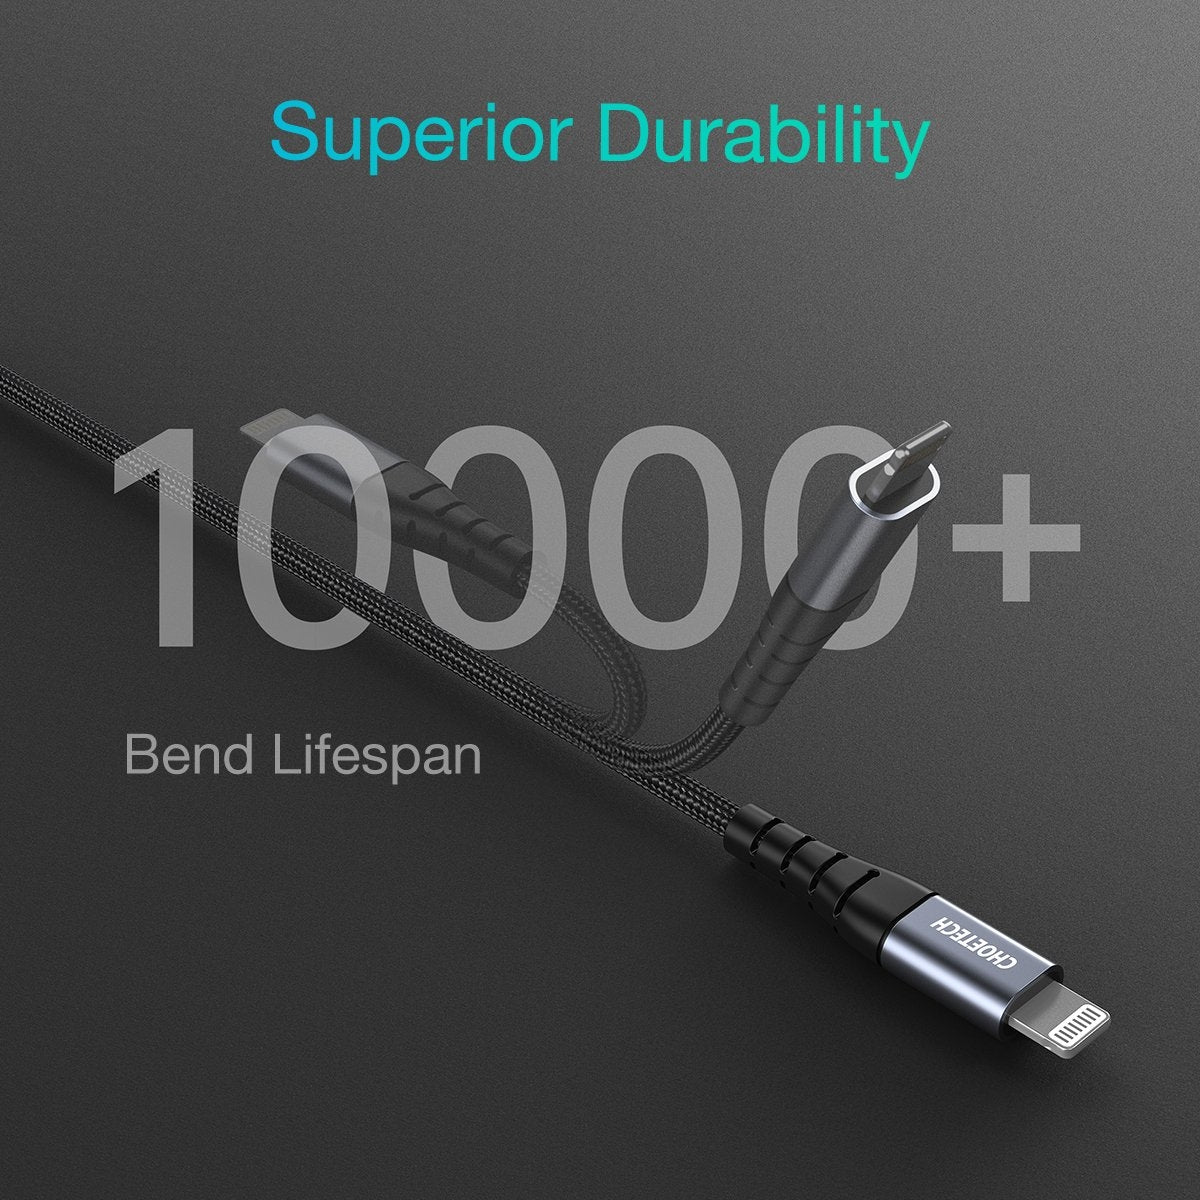 Usb-C To Iphone Mfi Certified Cable 2M